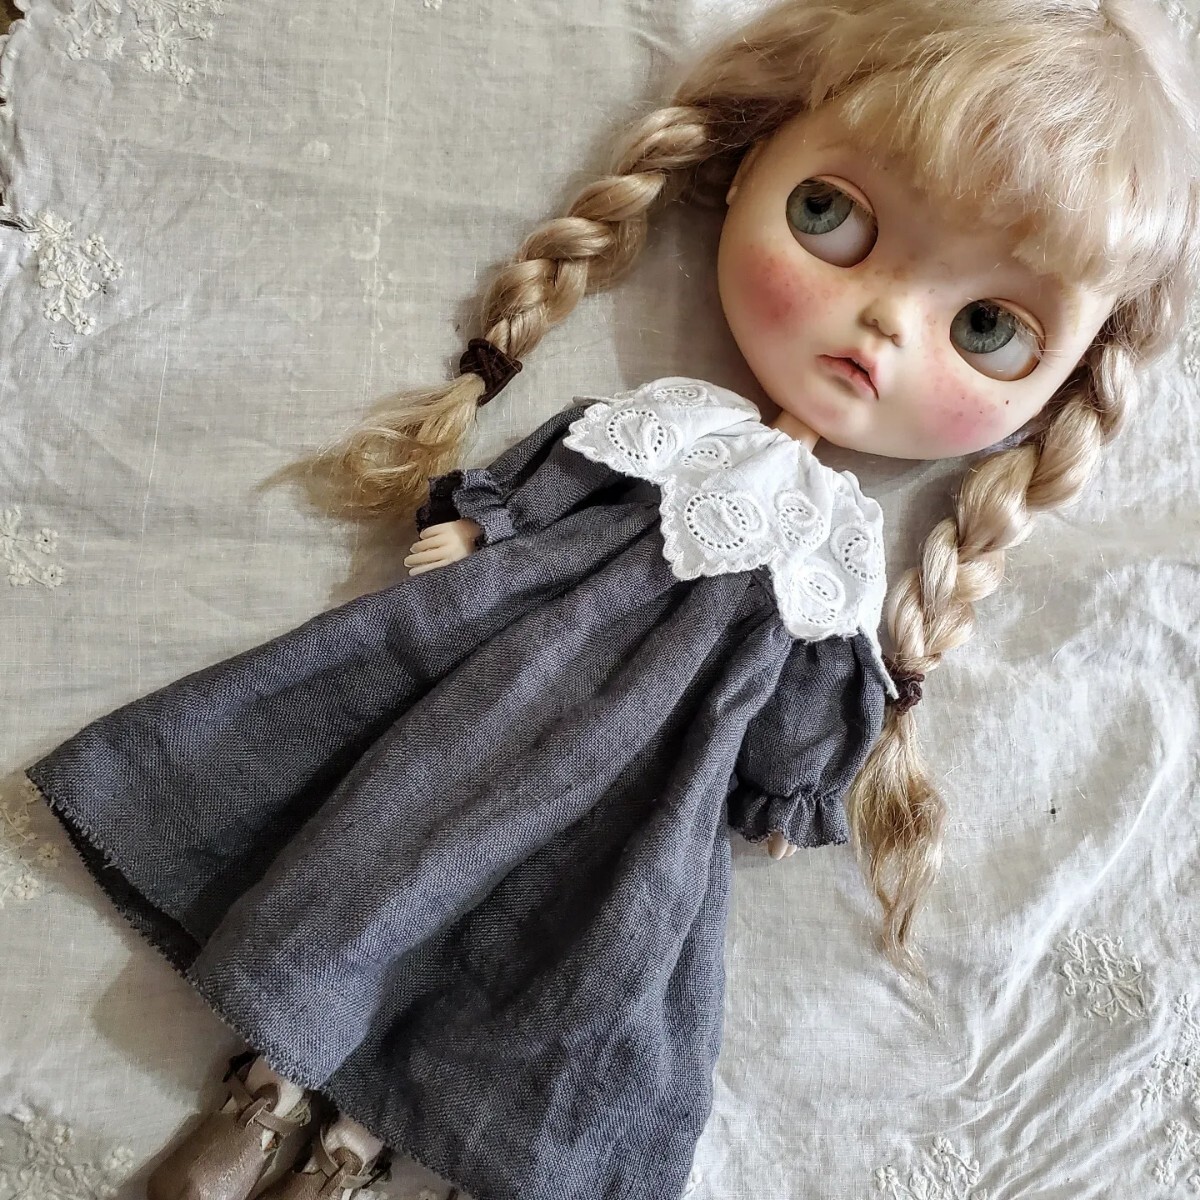 otodoll doll for miniature miscellaneous goods . One-piece out Fit antique blythe Blythe 